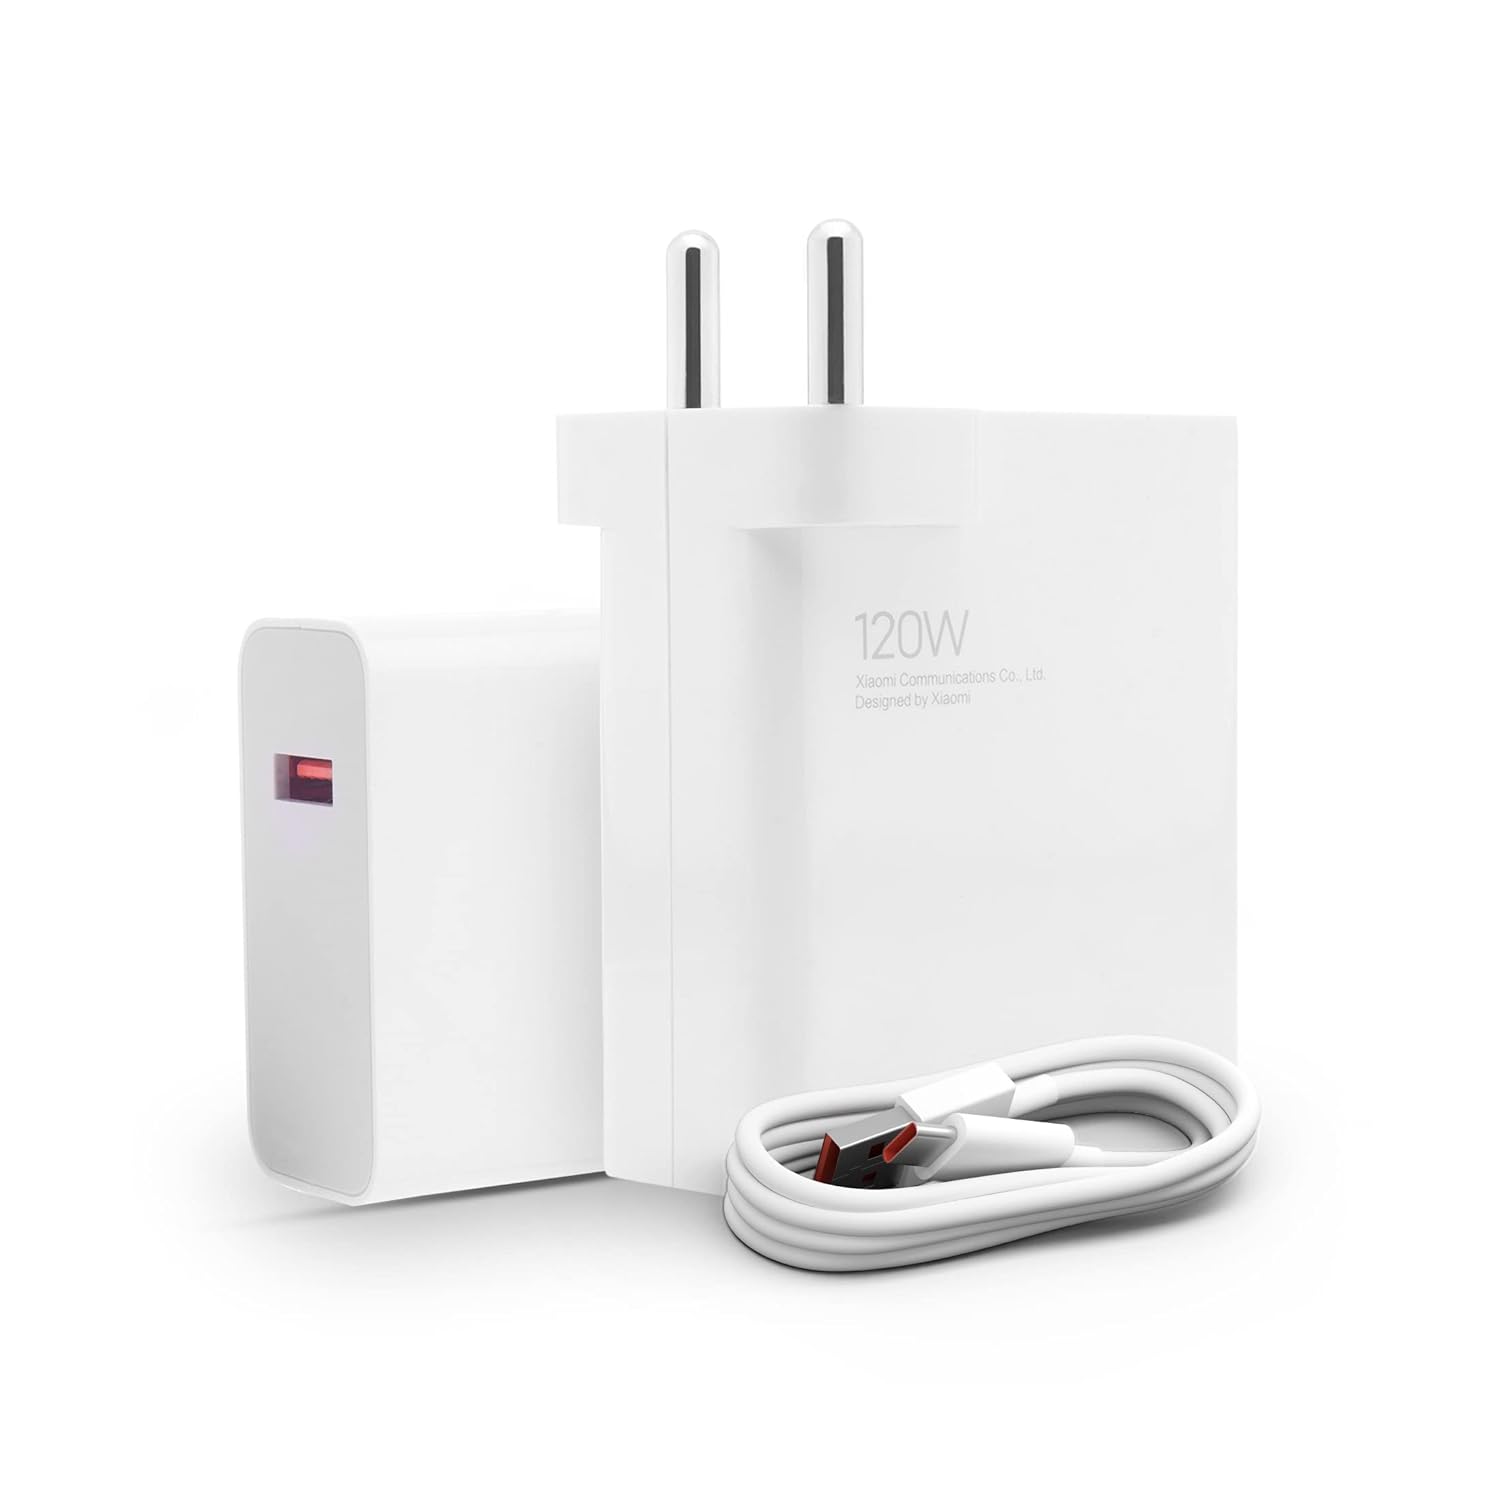 Xiaomi’s blazing-fast Mi 120W HyperCharge adapter combo now on sale for just Rs 2,499 - News - News